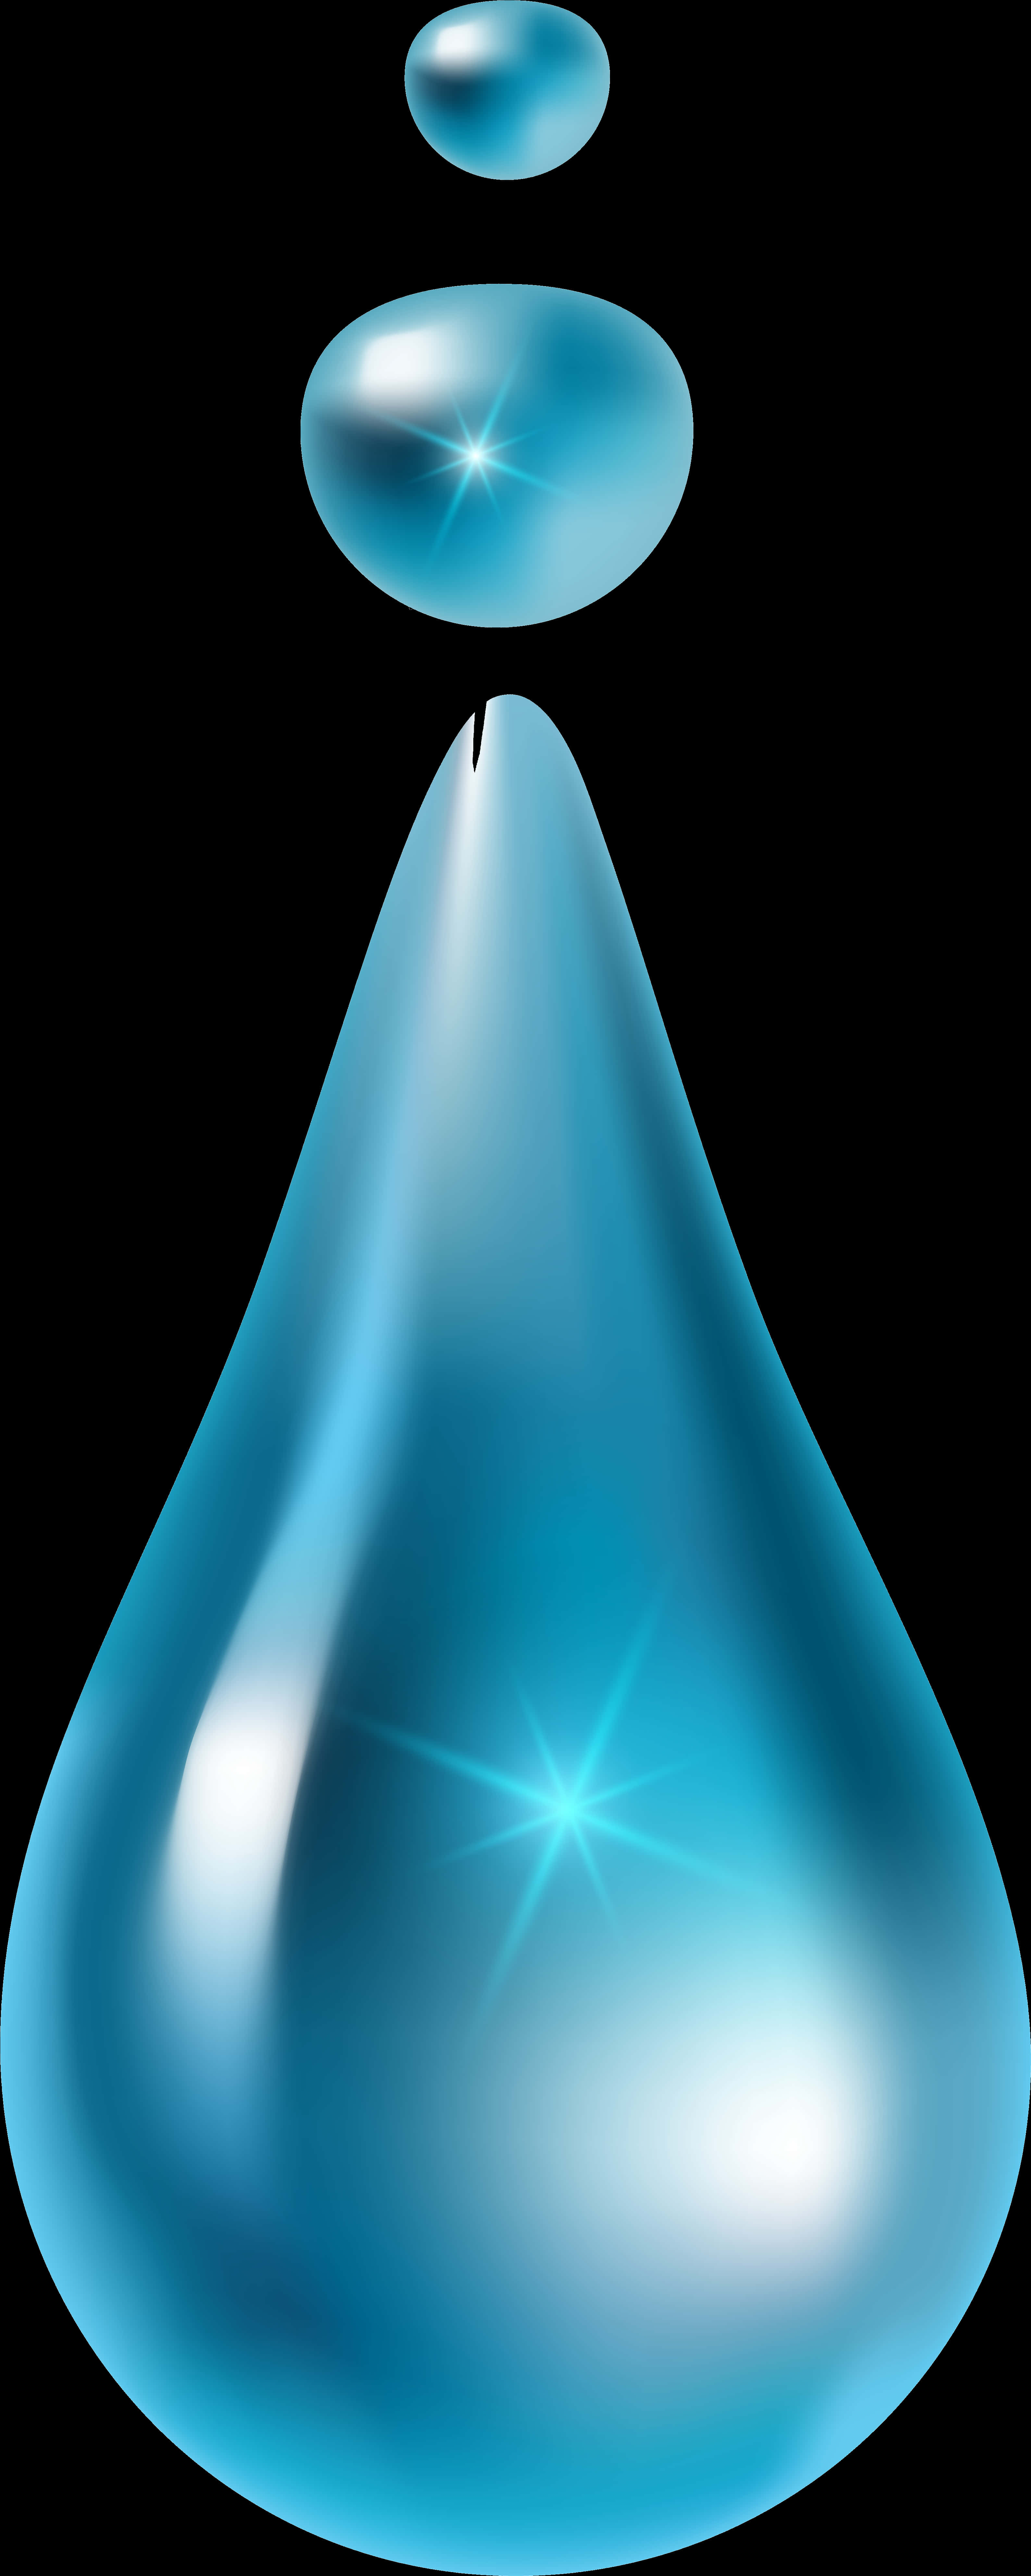 Glistening Water Dropson Black Background PNG image